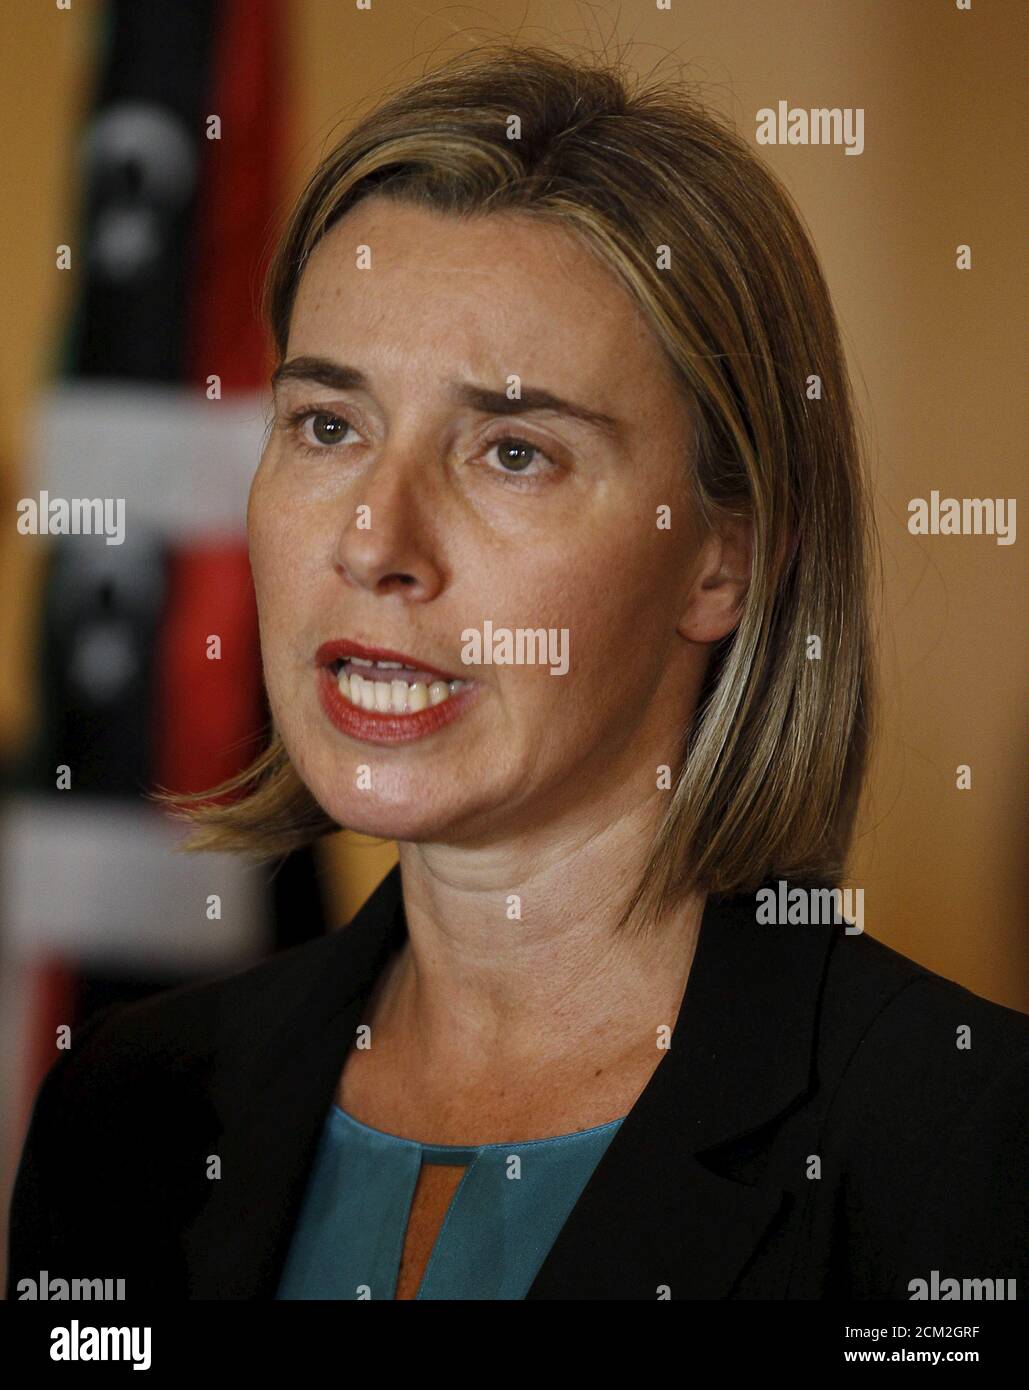 European Union foreign policy chief Federica Mogherini speaks during a news conference with Libyan prime minister-designate under a proposed National Unity government Fayez Seraj in Tunis, Tunisia January 8, 2016.    REUTERS/Zoubeir Souissi Stock Photo